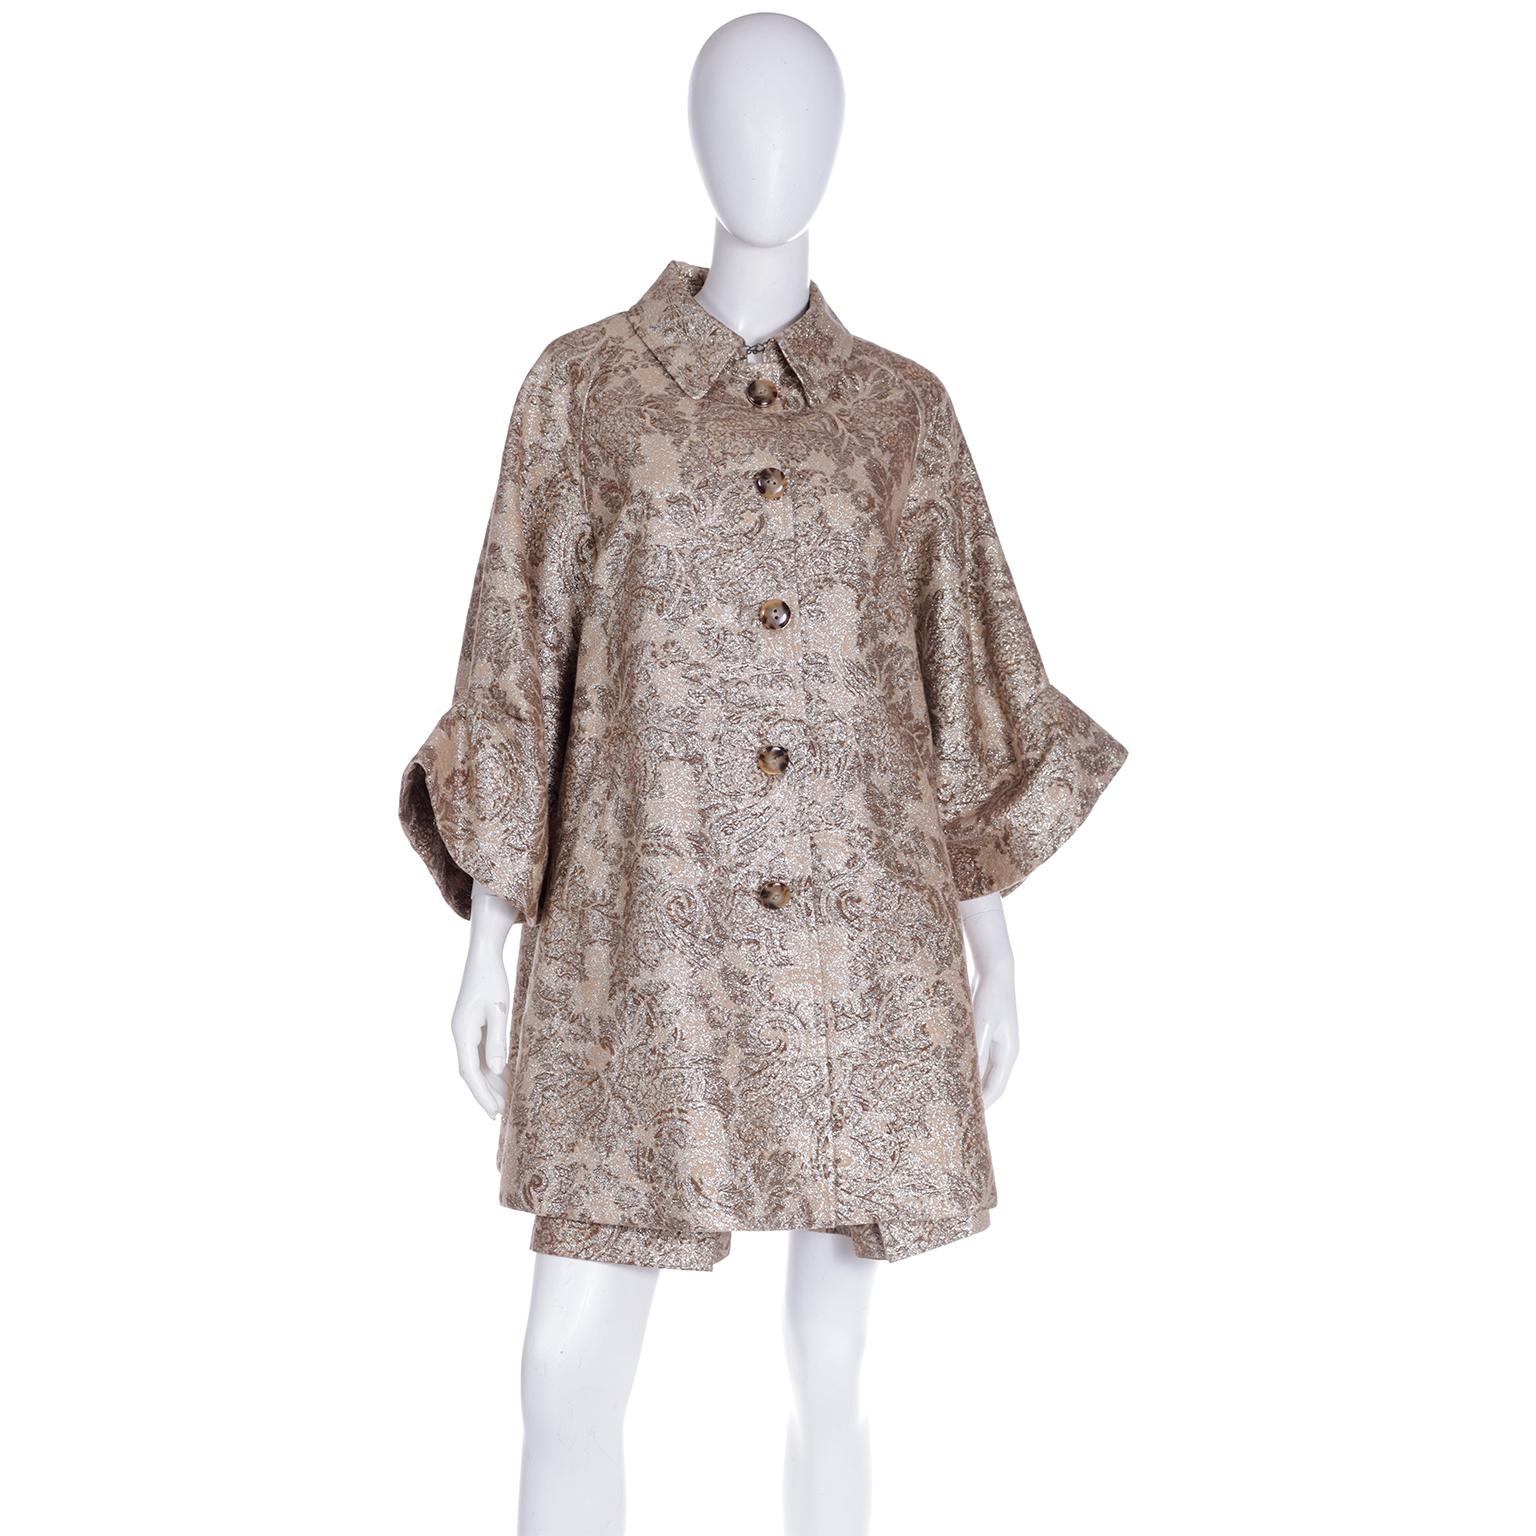 D&G Dolce & Gabbana Gold Floral Dress and Coat With Belt Amy Winehouse 2007 For Sale 7